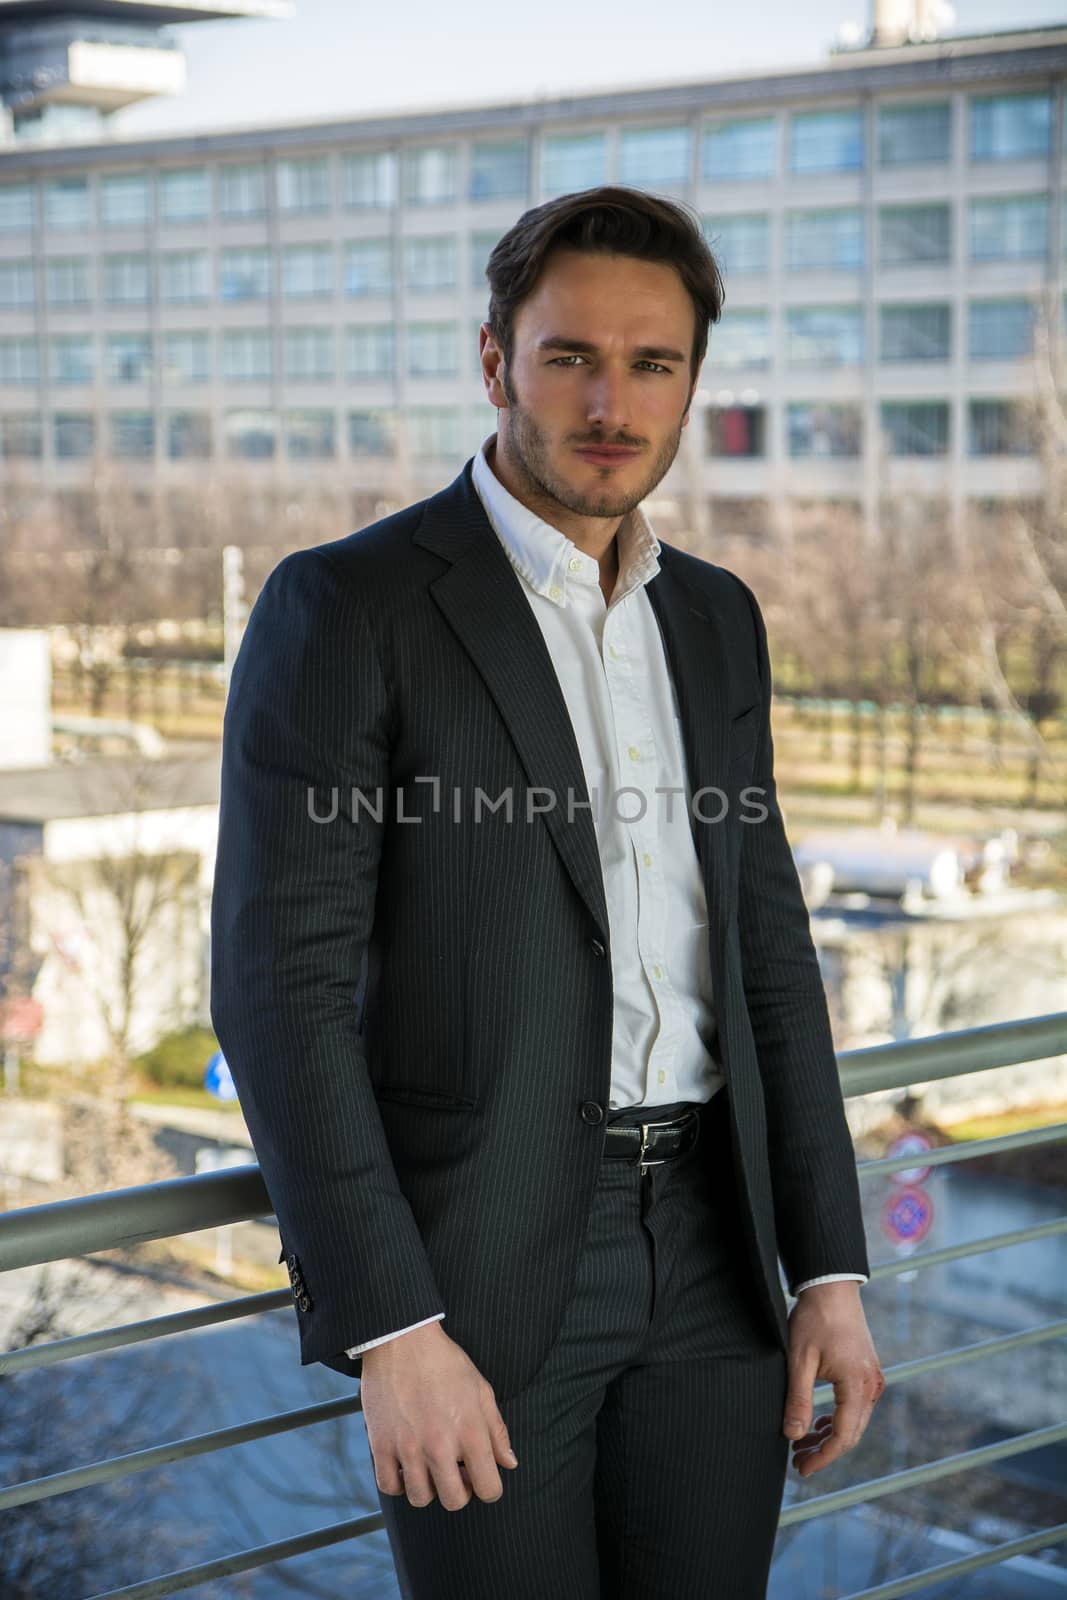 Half body portrait of stylish young man wearing business suit, standing against metal handrail outdoor